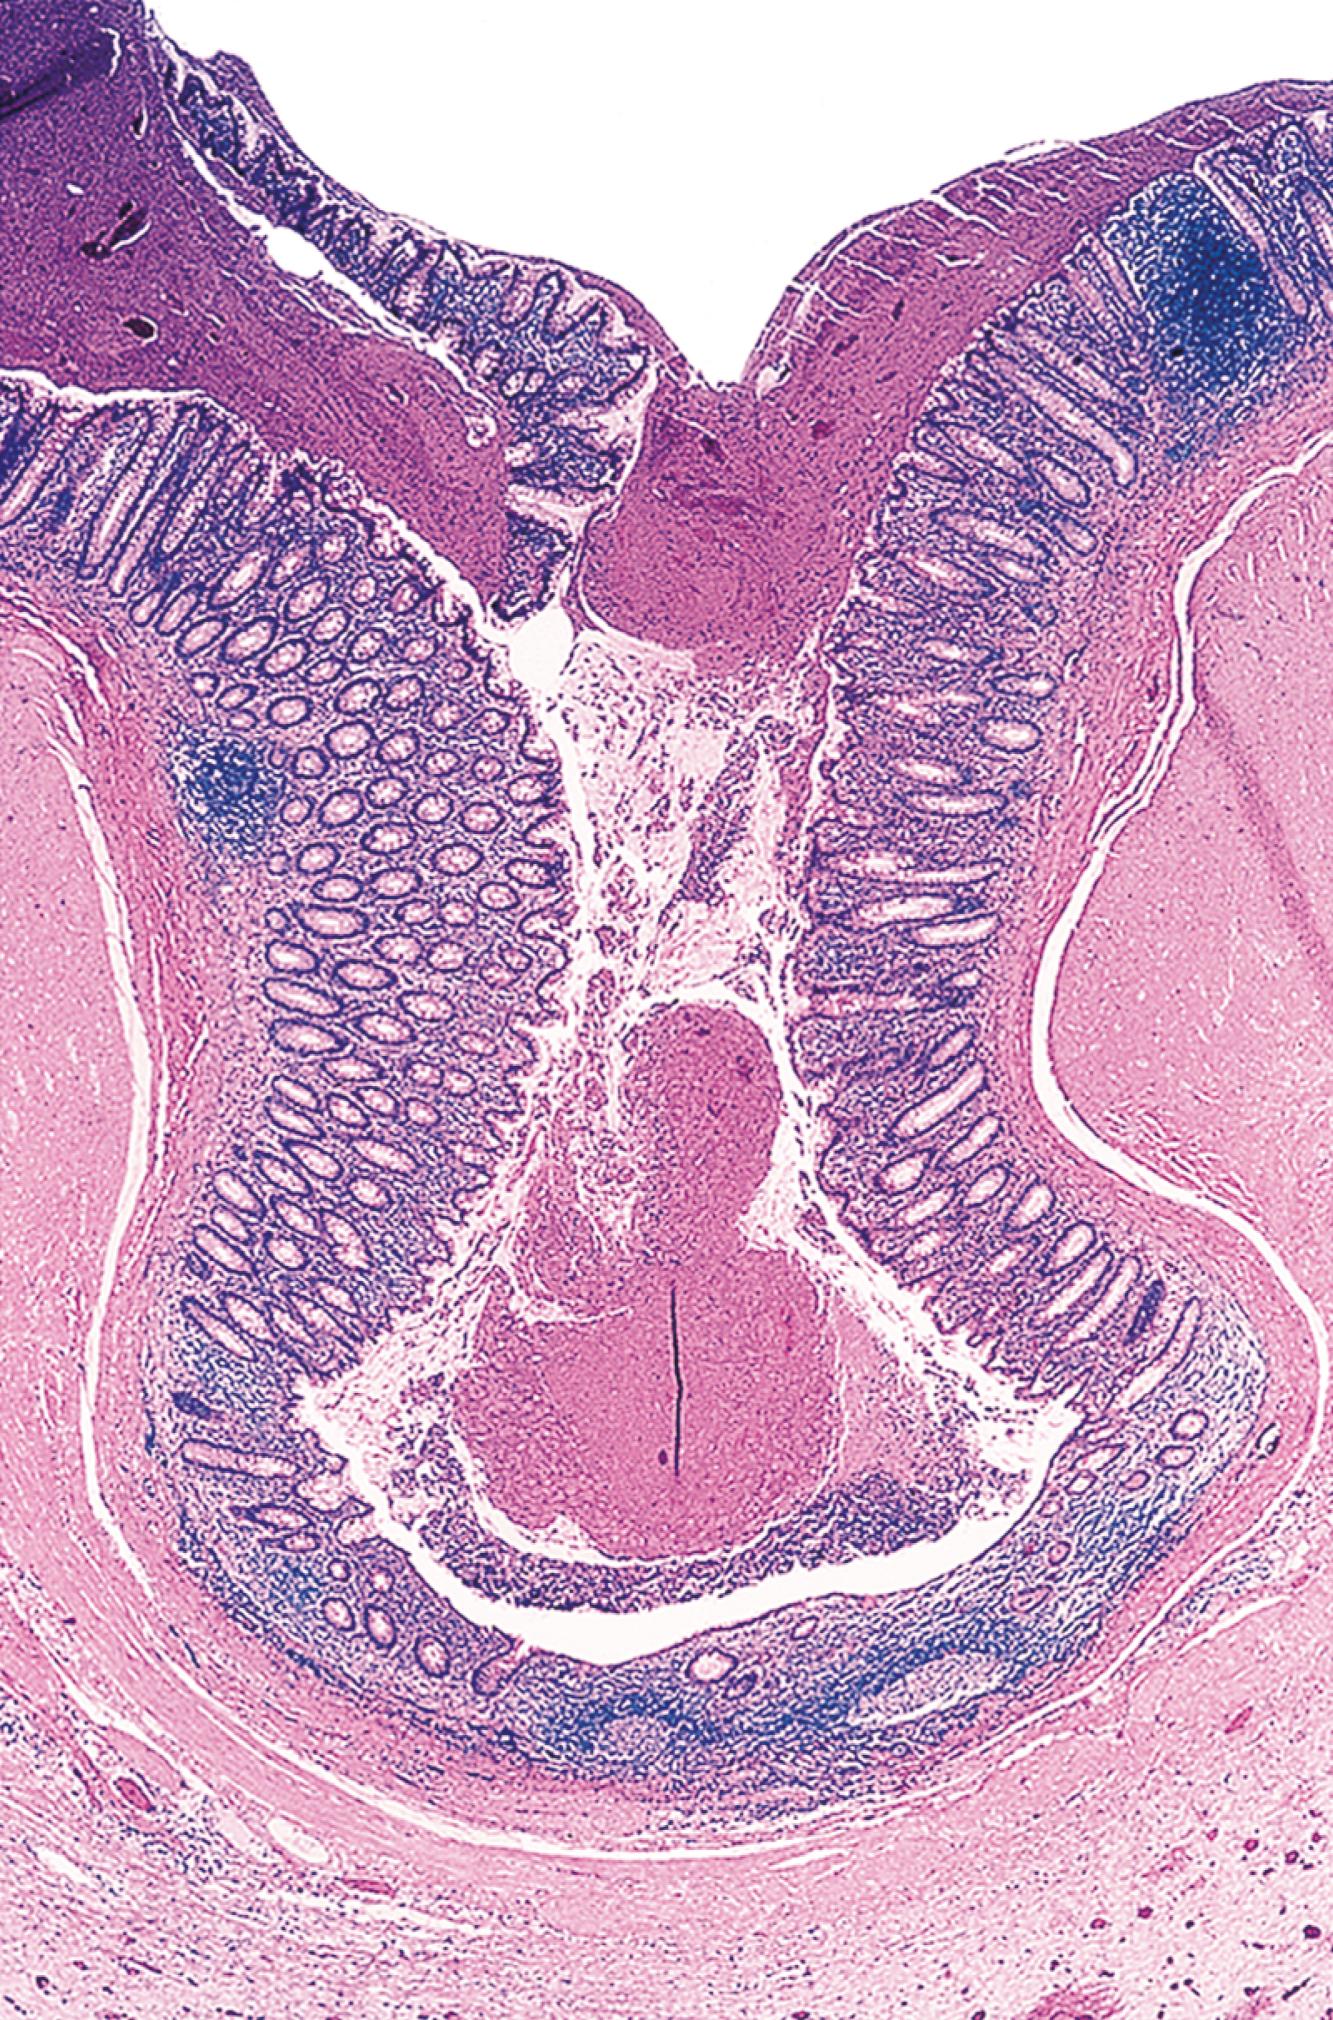 FIGURE 18.4, Acquired appendiceal diverticulum in a patient with cystic fibrosis.